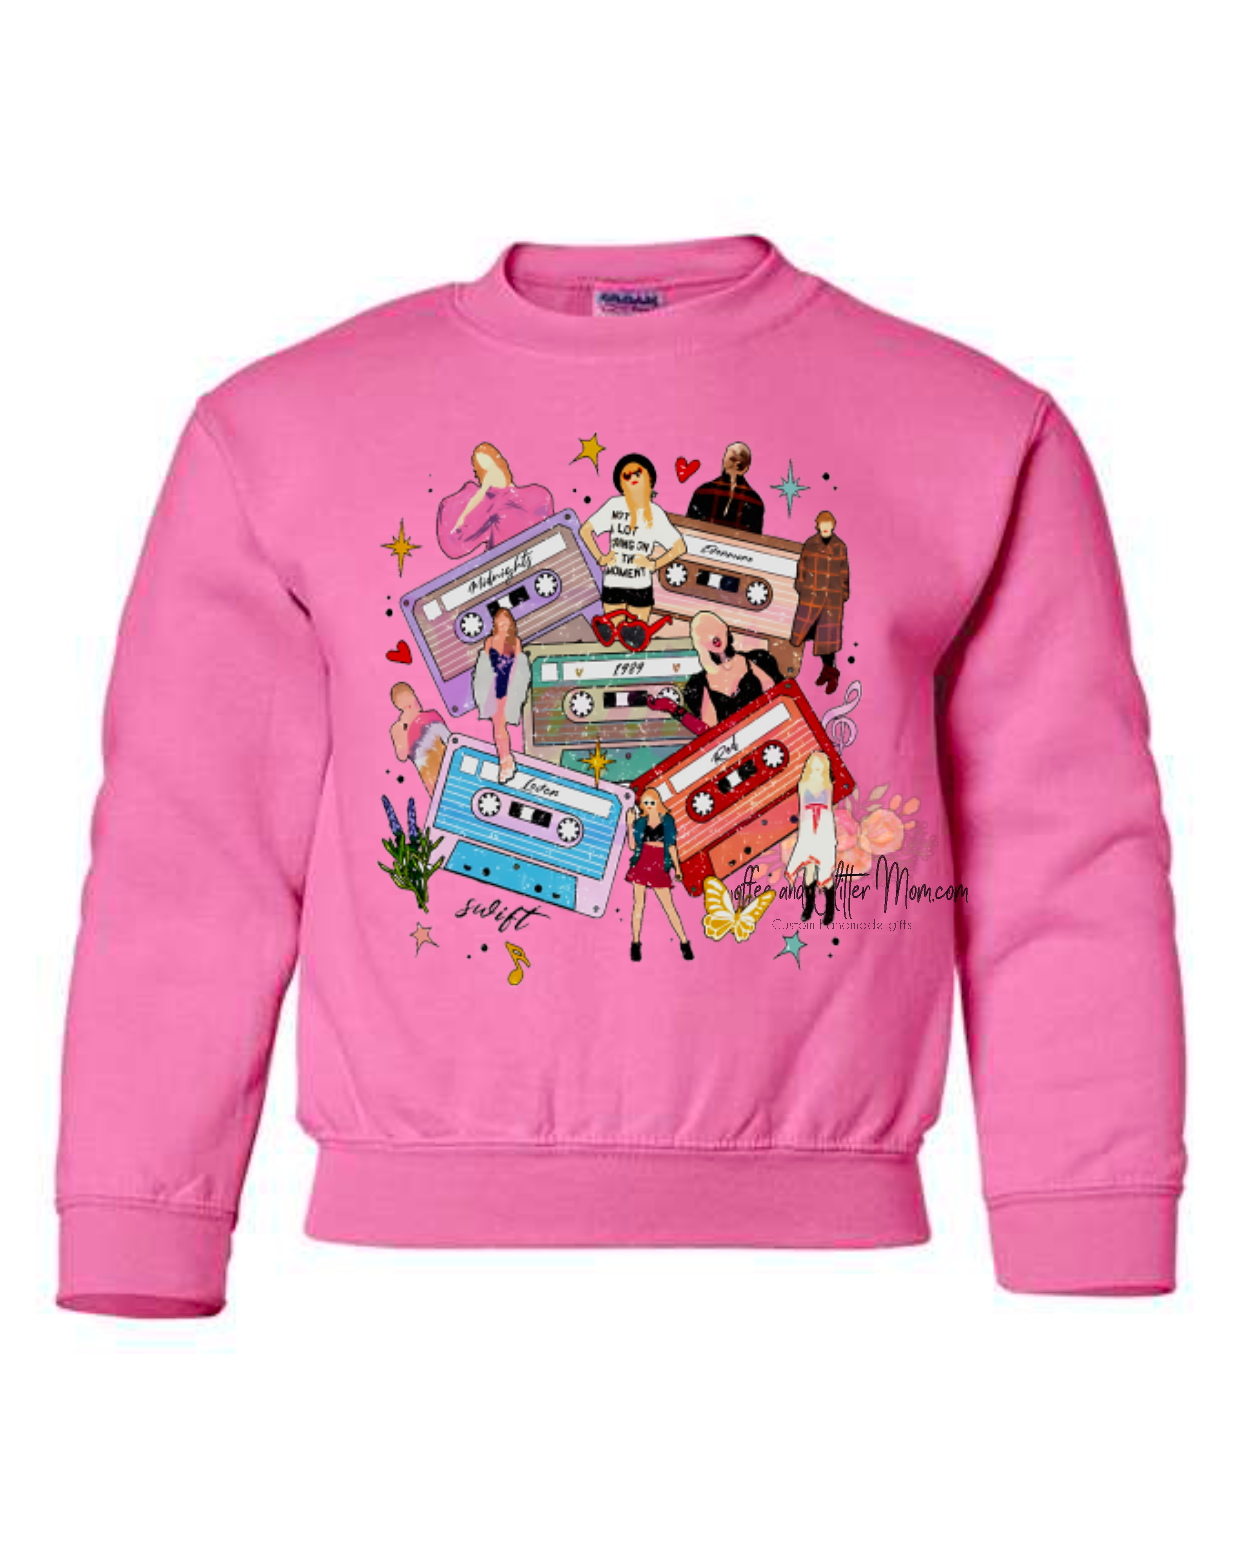 Taylor's Tapes Youth Tee or Sweatshirt